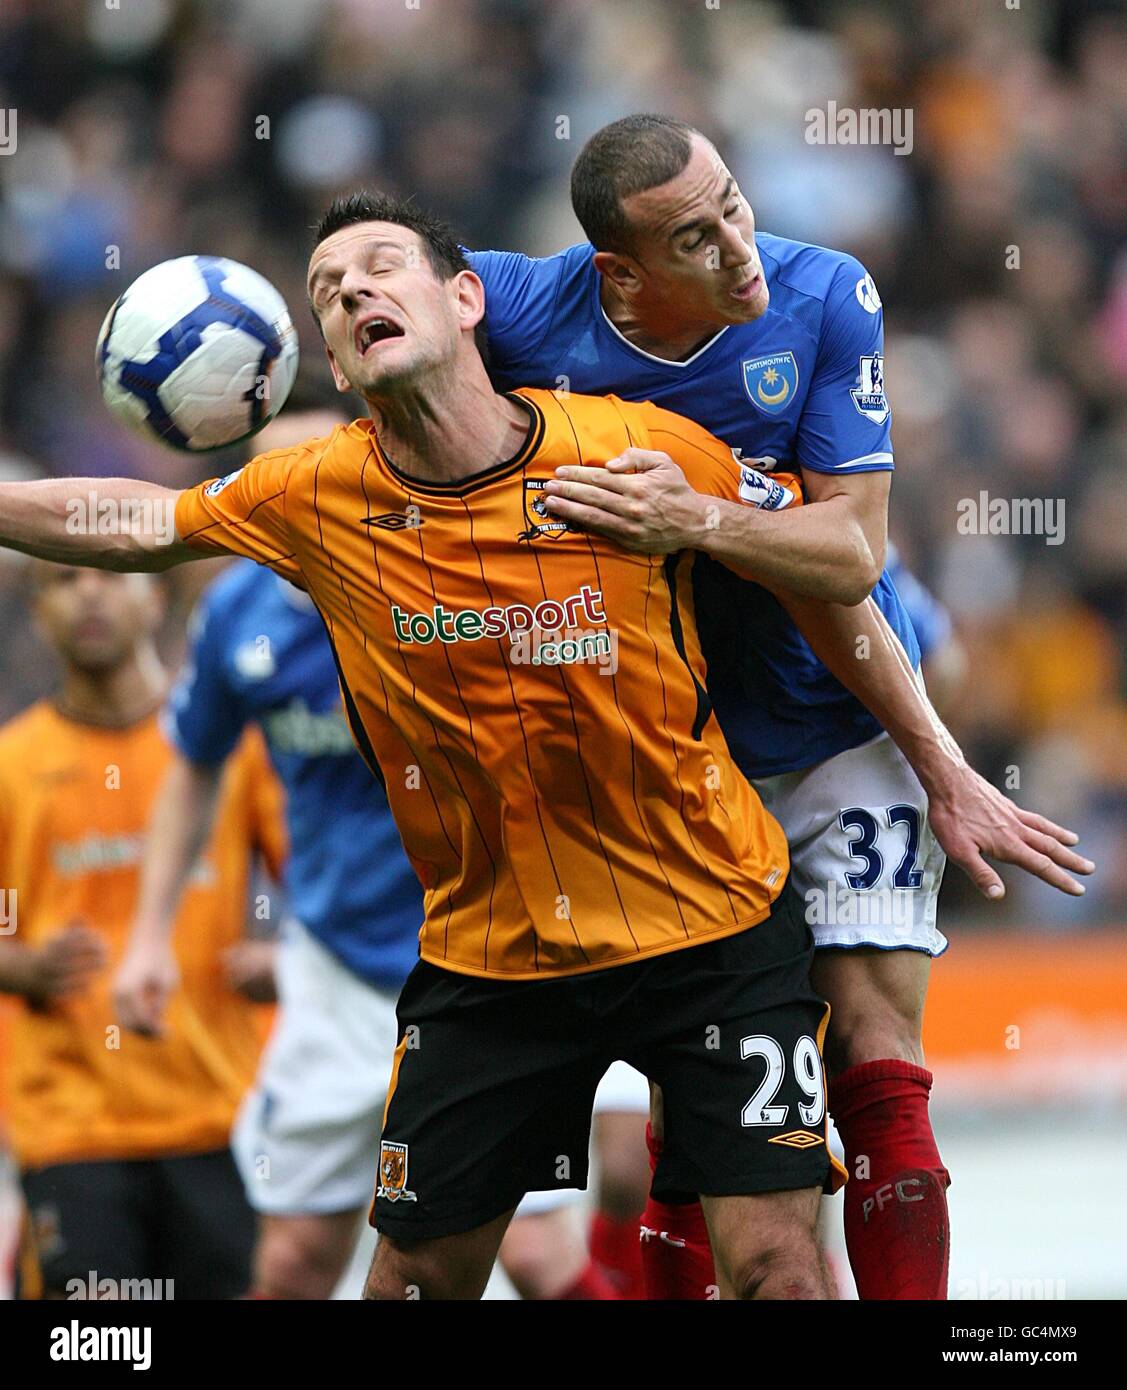 Portsmouth's Hassan Yebda (right) and Hull City's Jan Vennegoor of Hesselink (left) battle for the ball in the air Stock Photo